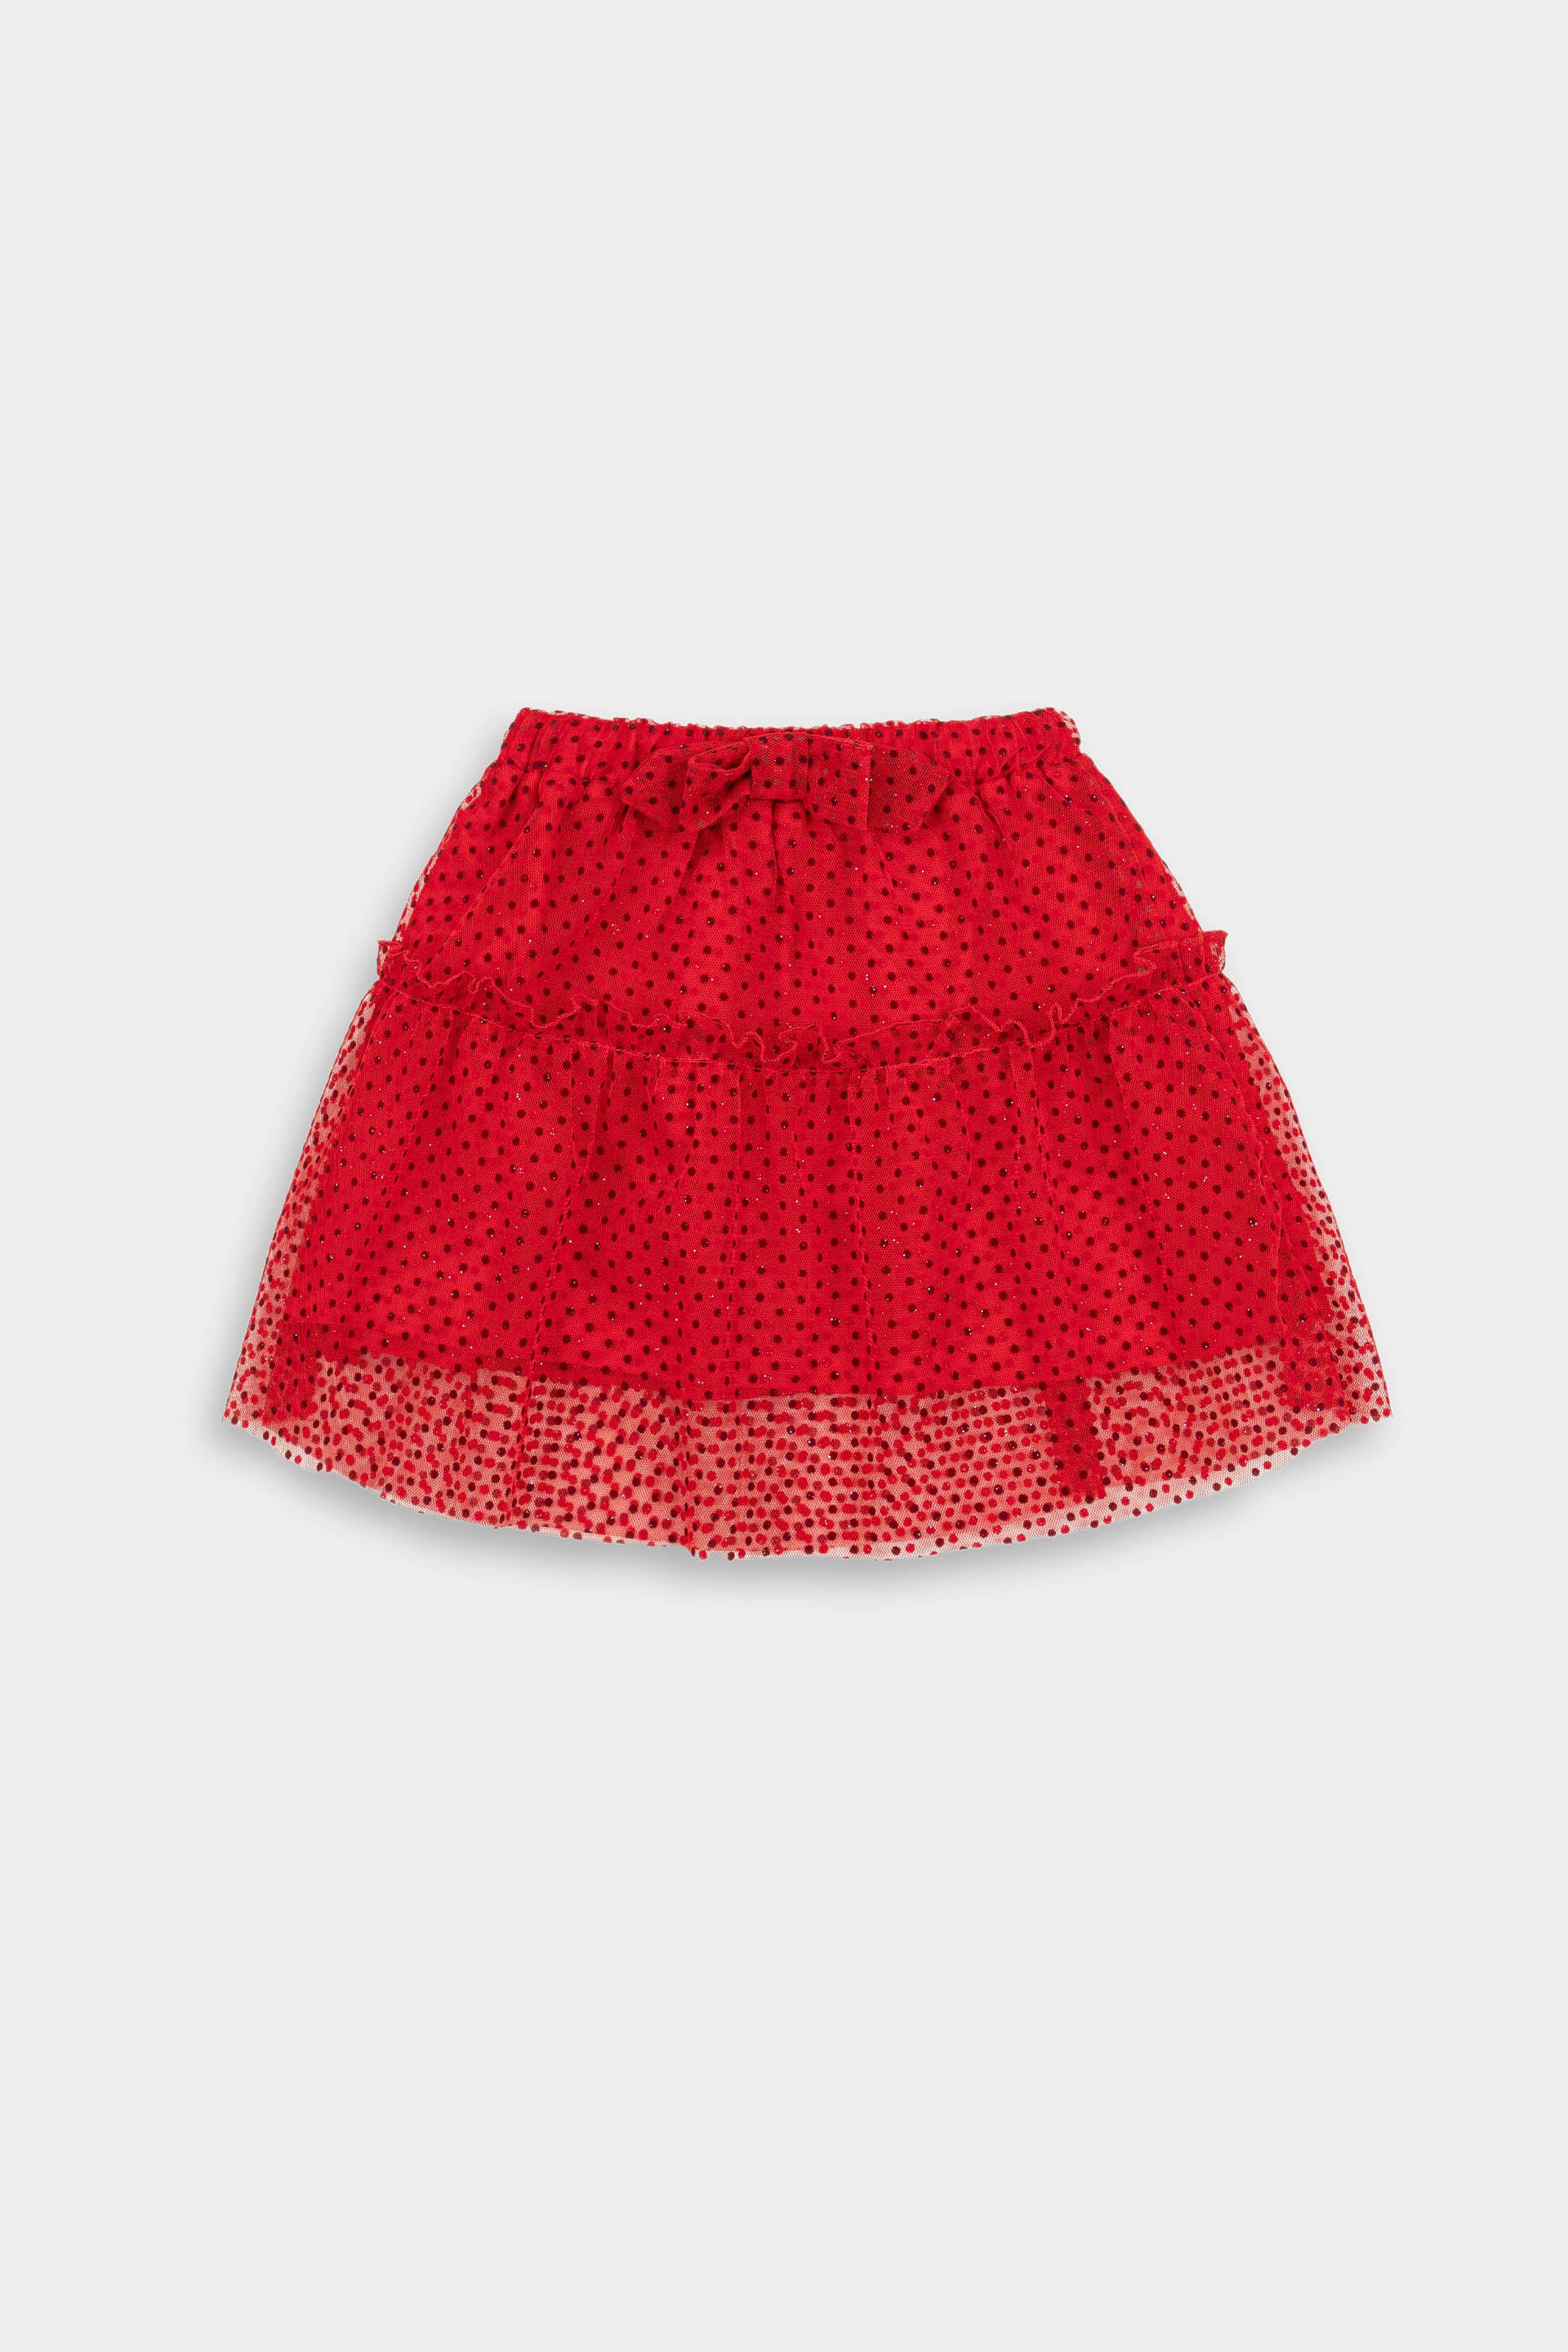 2-Tiered Skirt Red